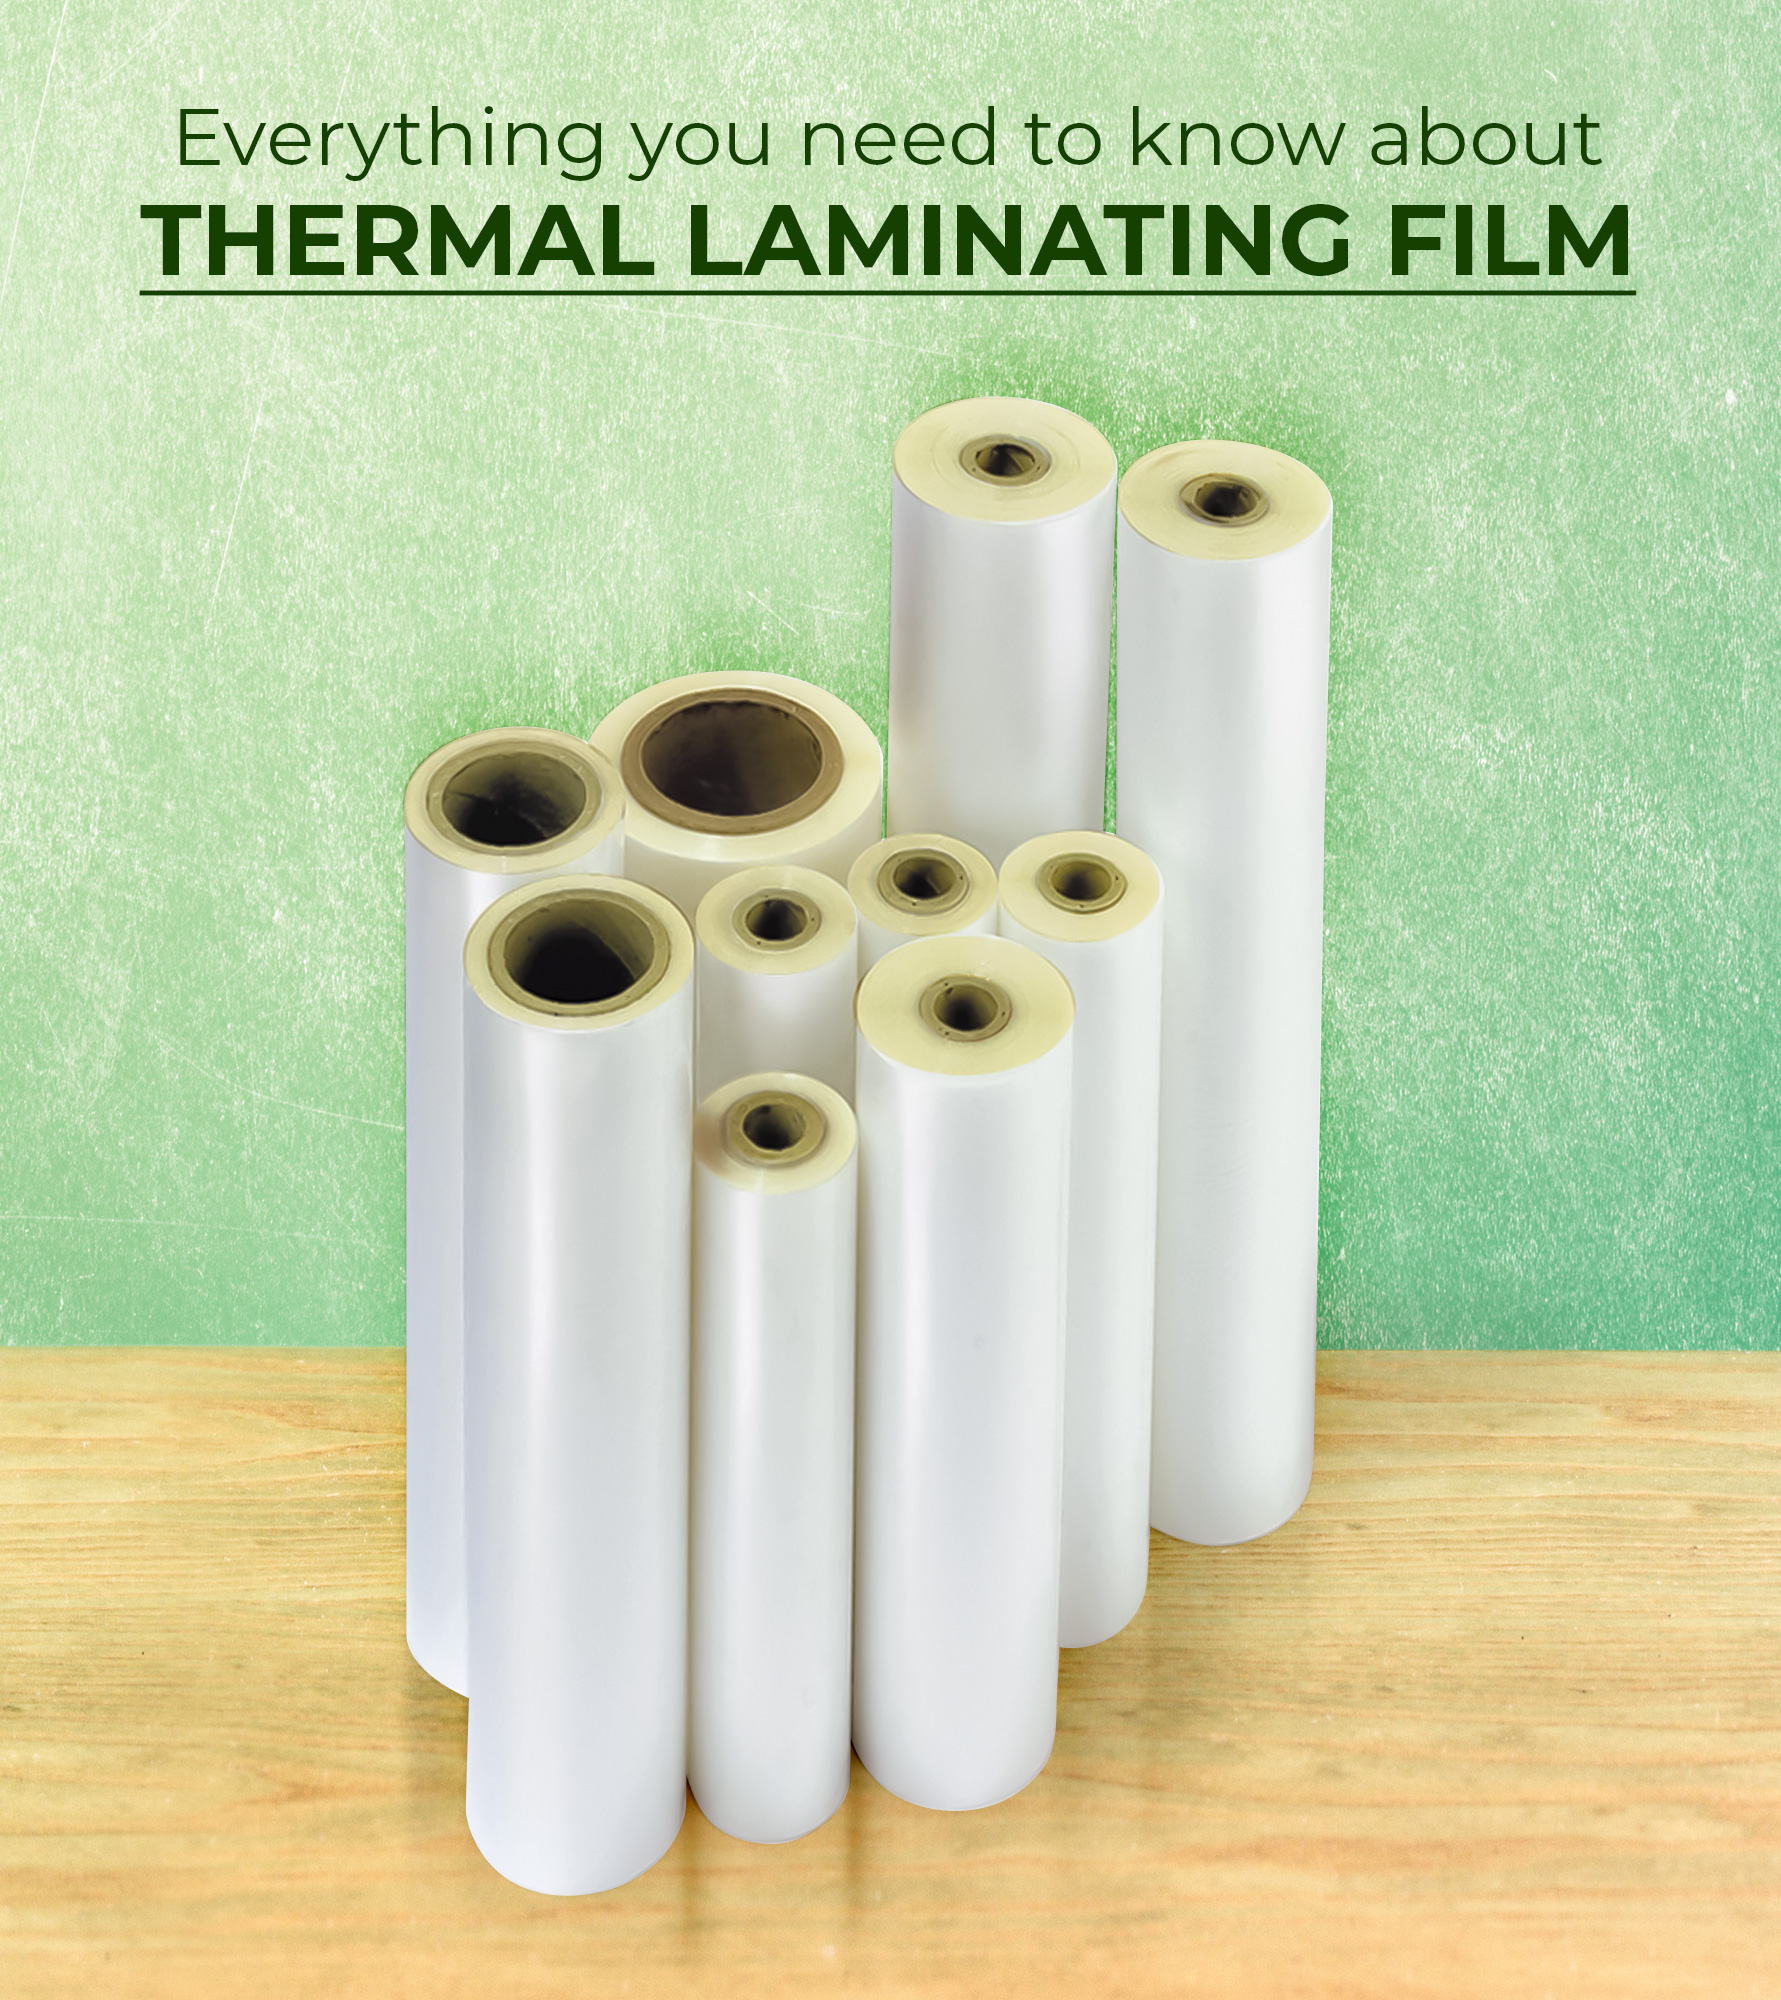 Matte or Gloss: Choosing the Right Laminating Film Finish